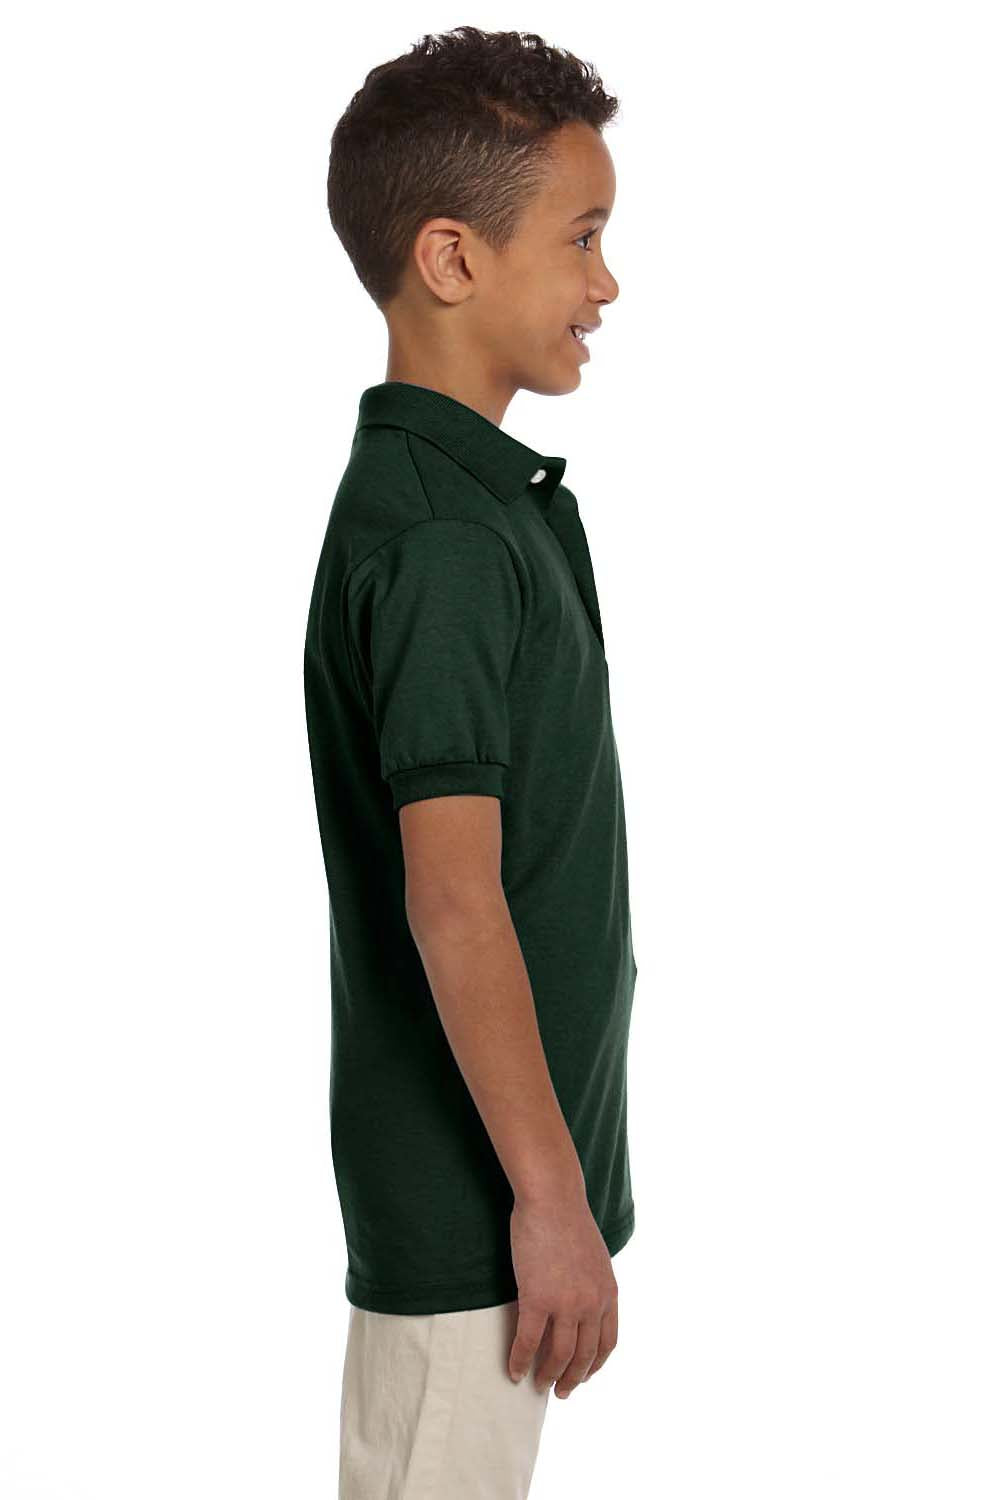 Jerzees 437Y Youth SpotShield Stain Resistant Short Sleeve Polo Shirt Forest Green Side